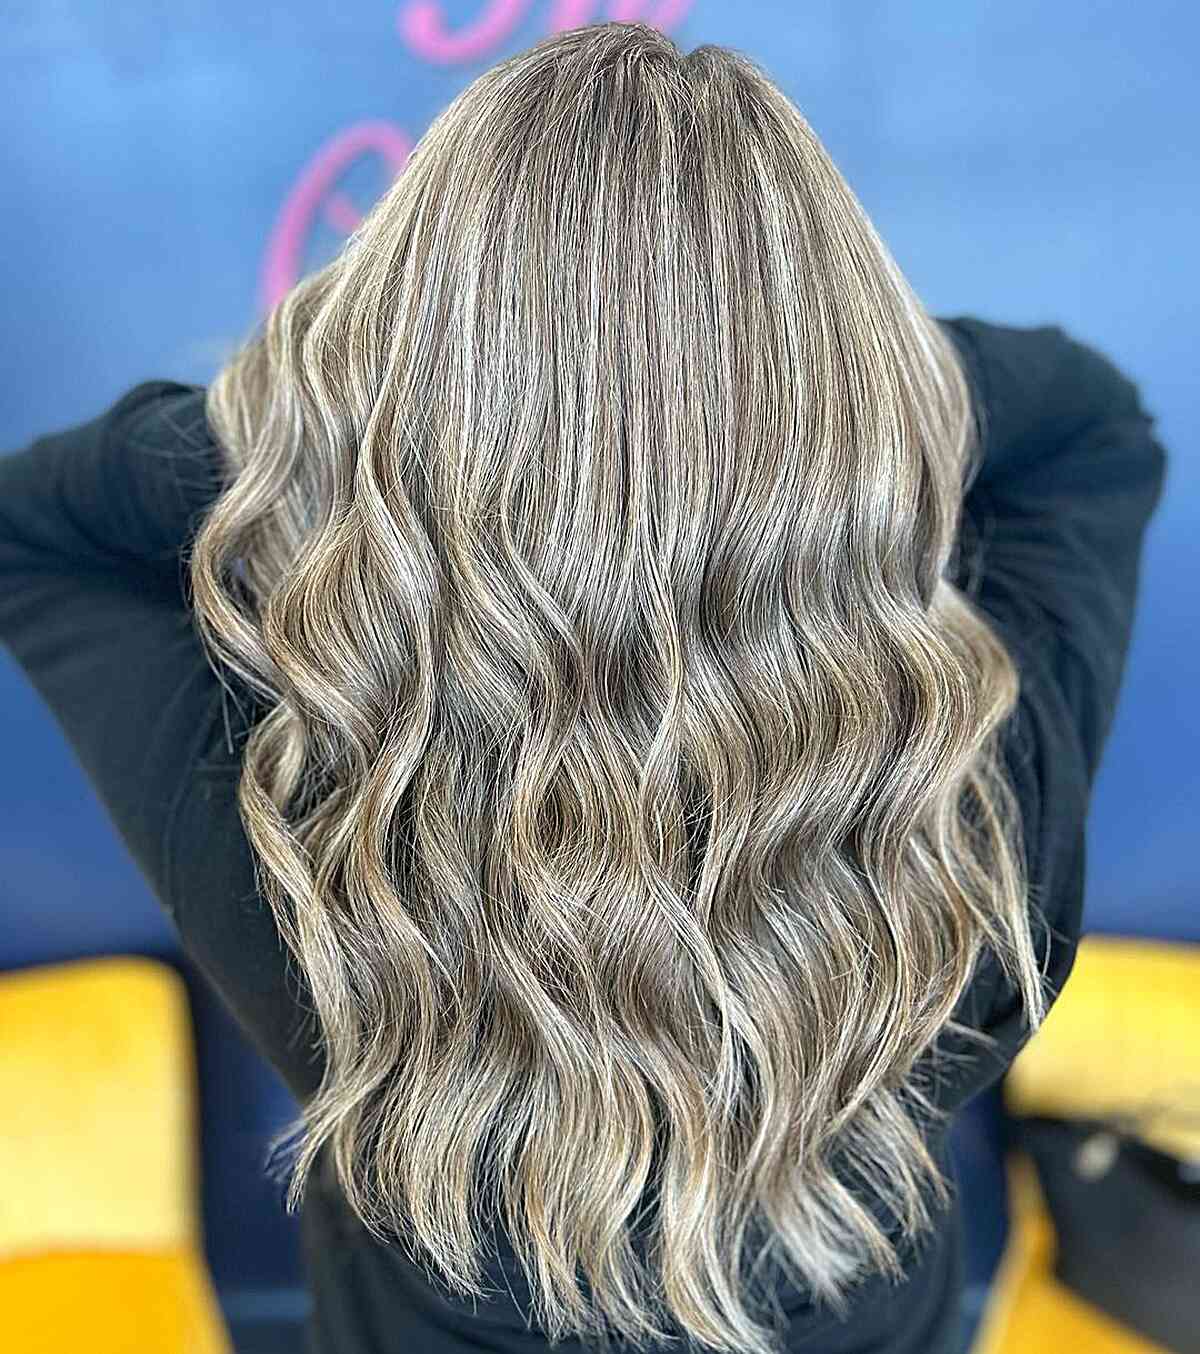 Dimensional Icy Blonde Balayage Highlights and Lowlights with Long Waves and Layers